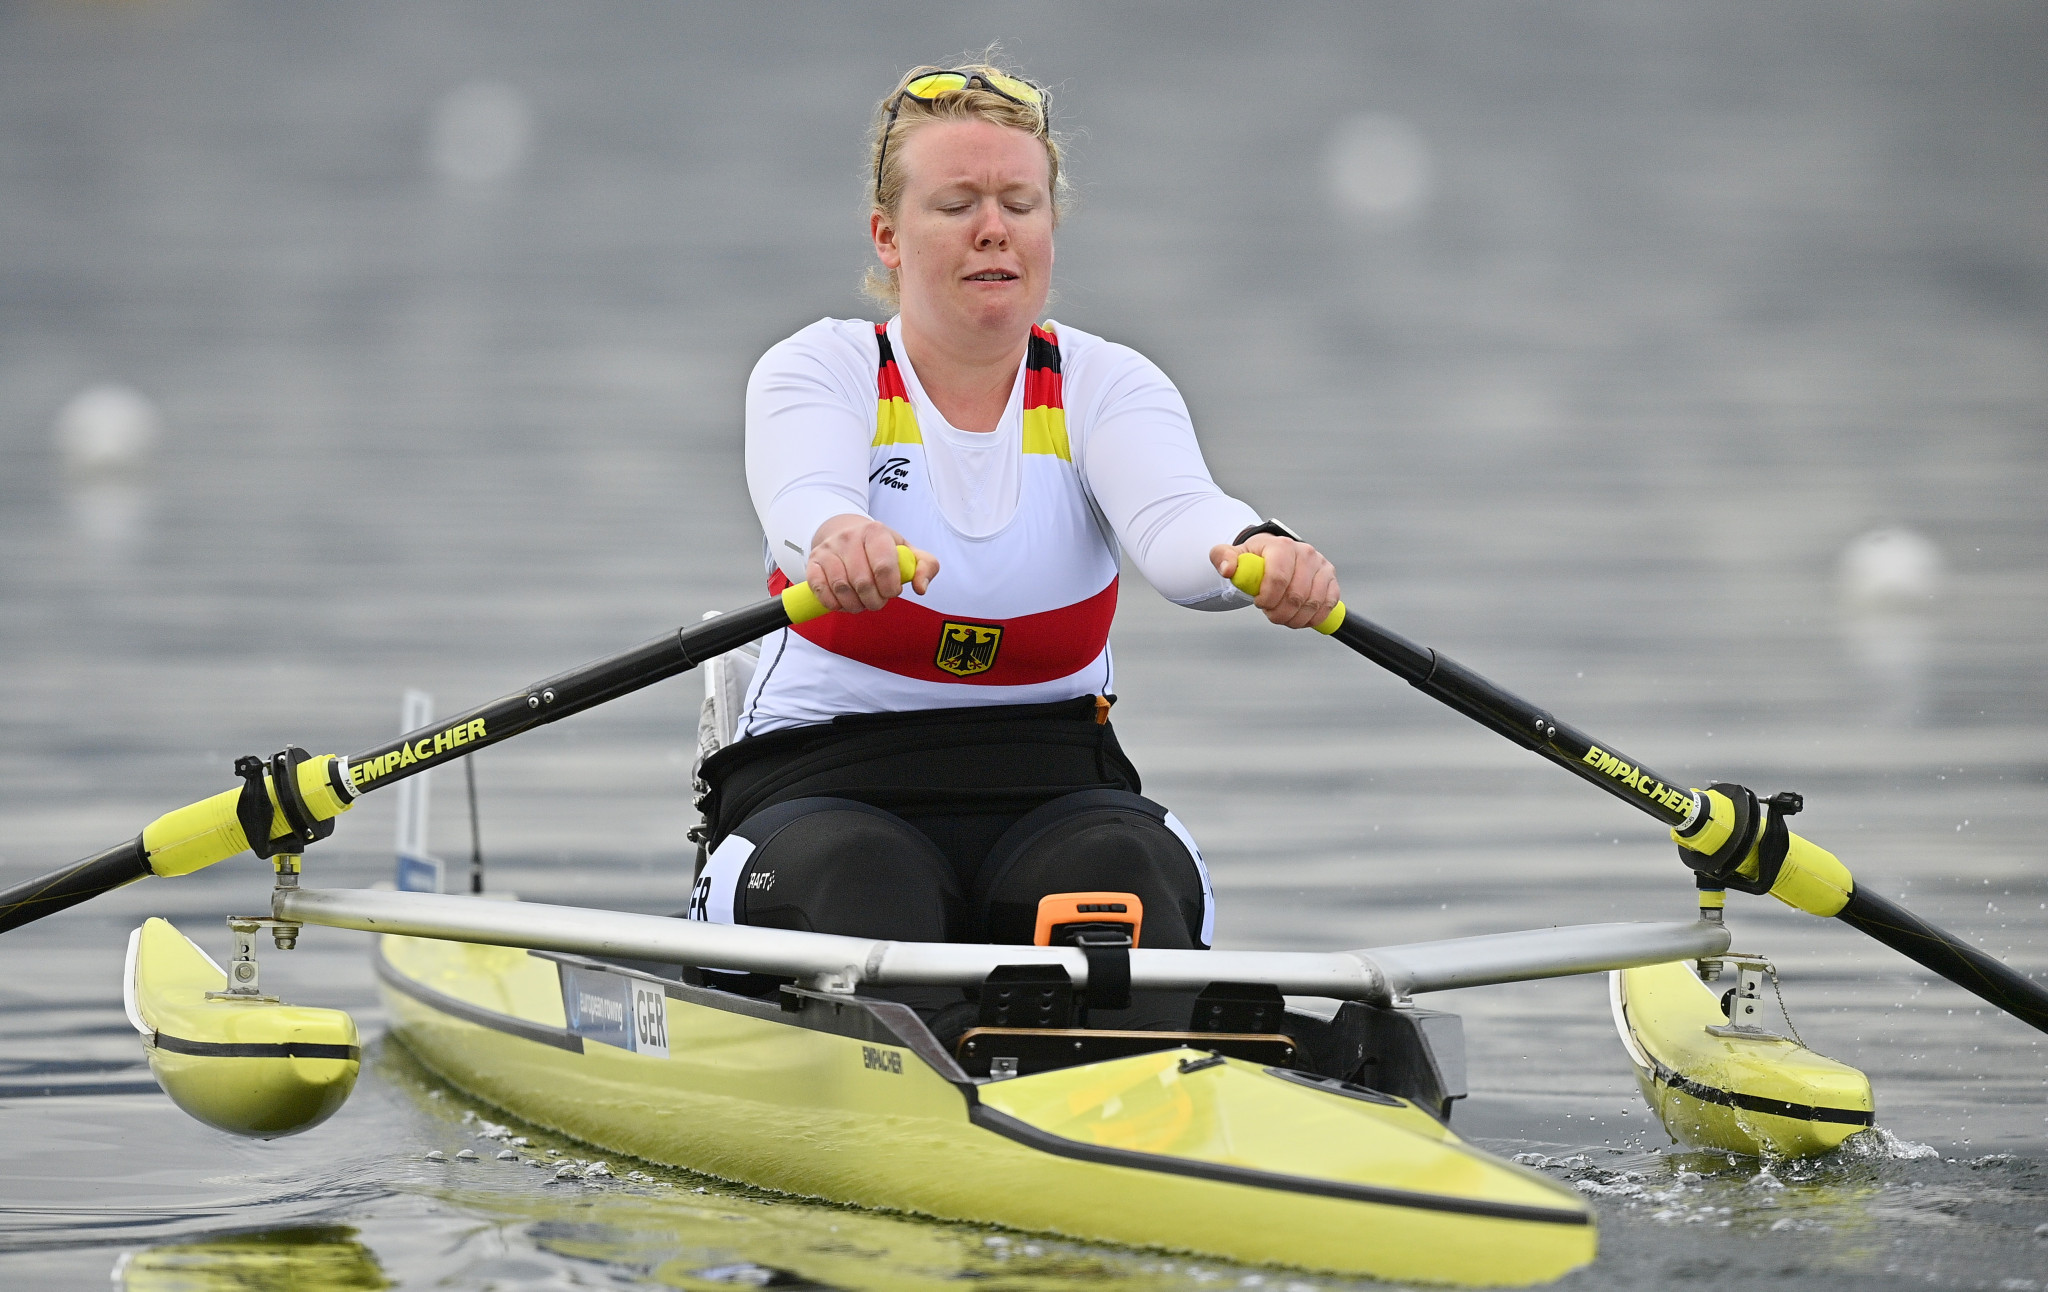 Germany's Manuela Diening finished in the top two in her PR1 women’s singles sculls repechage to seal a ticket to Paris 2024 ©Getty Images